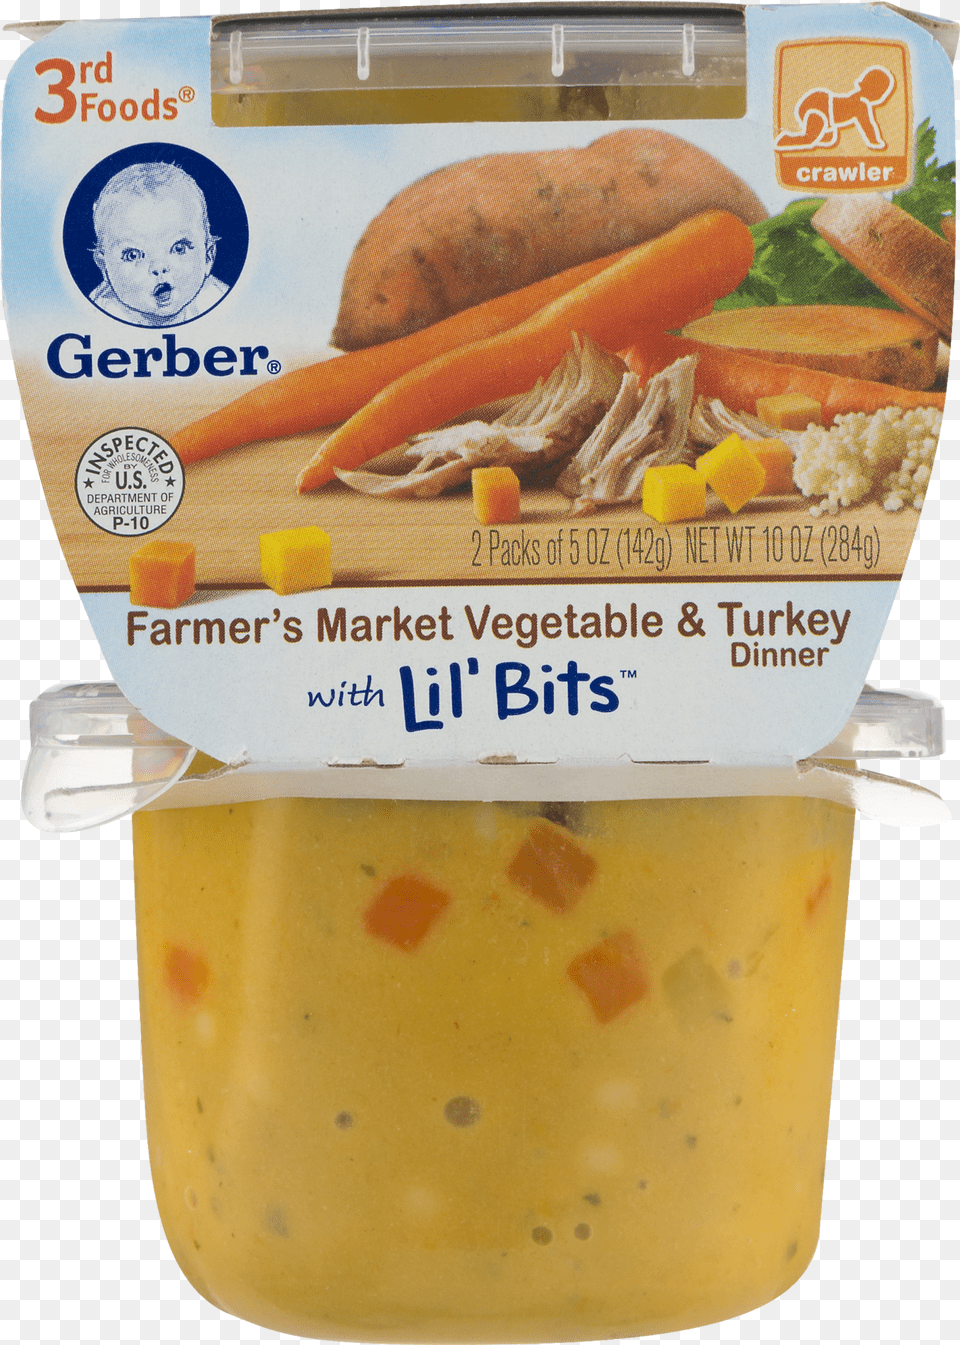 Gerber 3rd Foods Farmers Market Vegetable Amp Turkey Gerber 3rd Foods Lil39 Bits Farmer39s Market Vegetable, Baby, Produce, Plant, Person Png Image